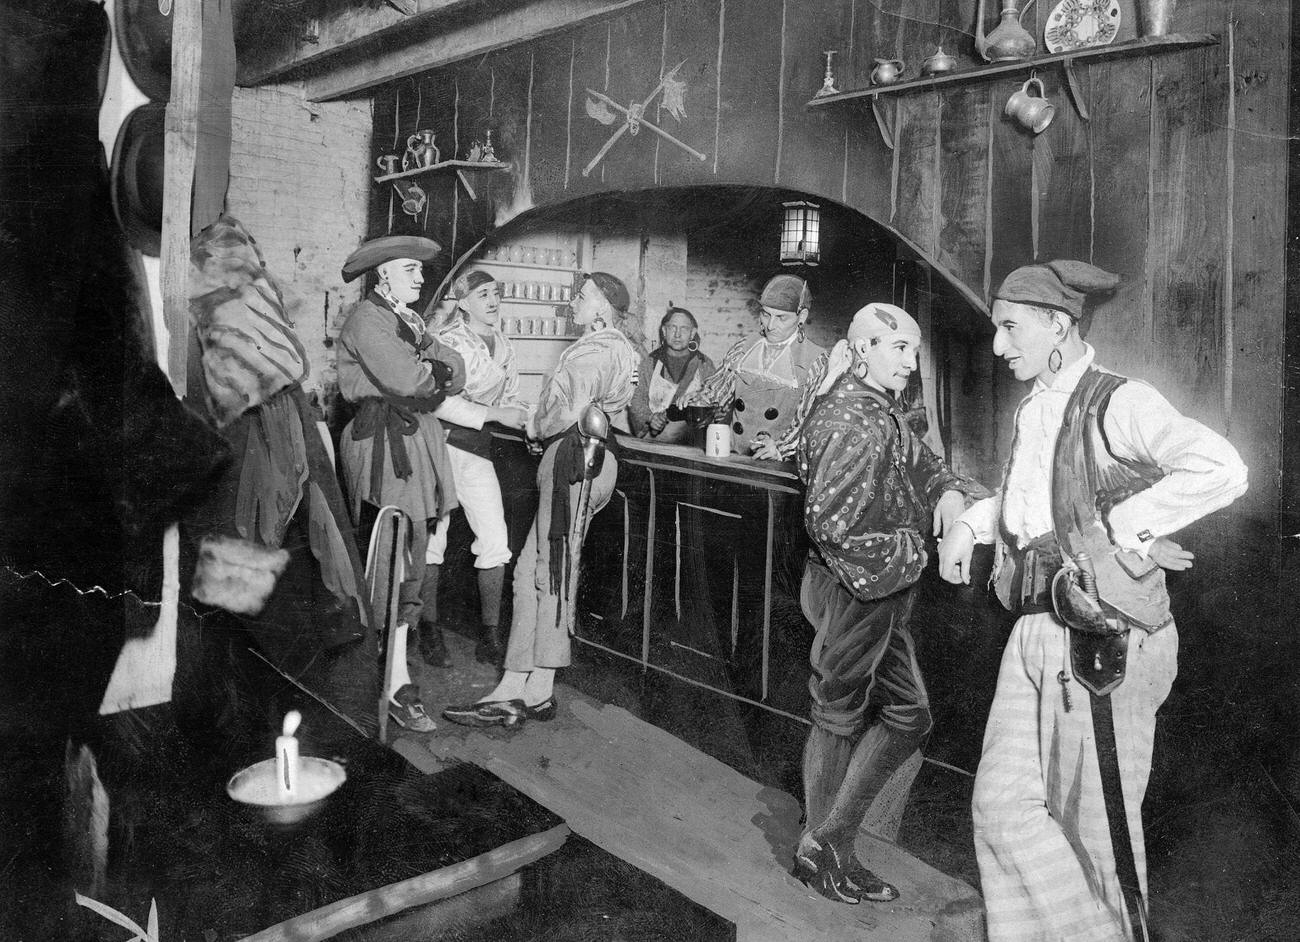 Men Dressed As Pirates Standing At Bar In Greenwich Village, 1920S.